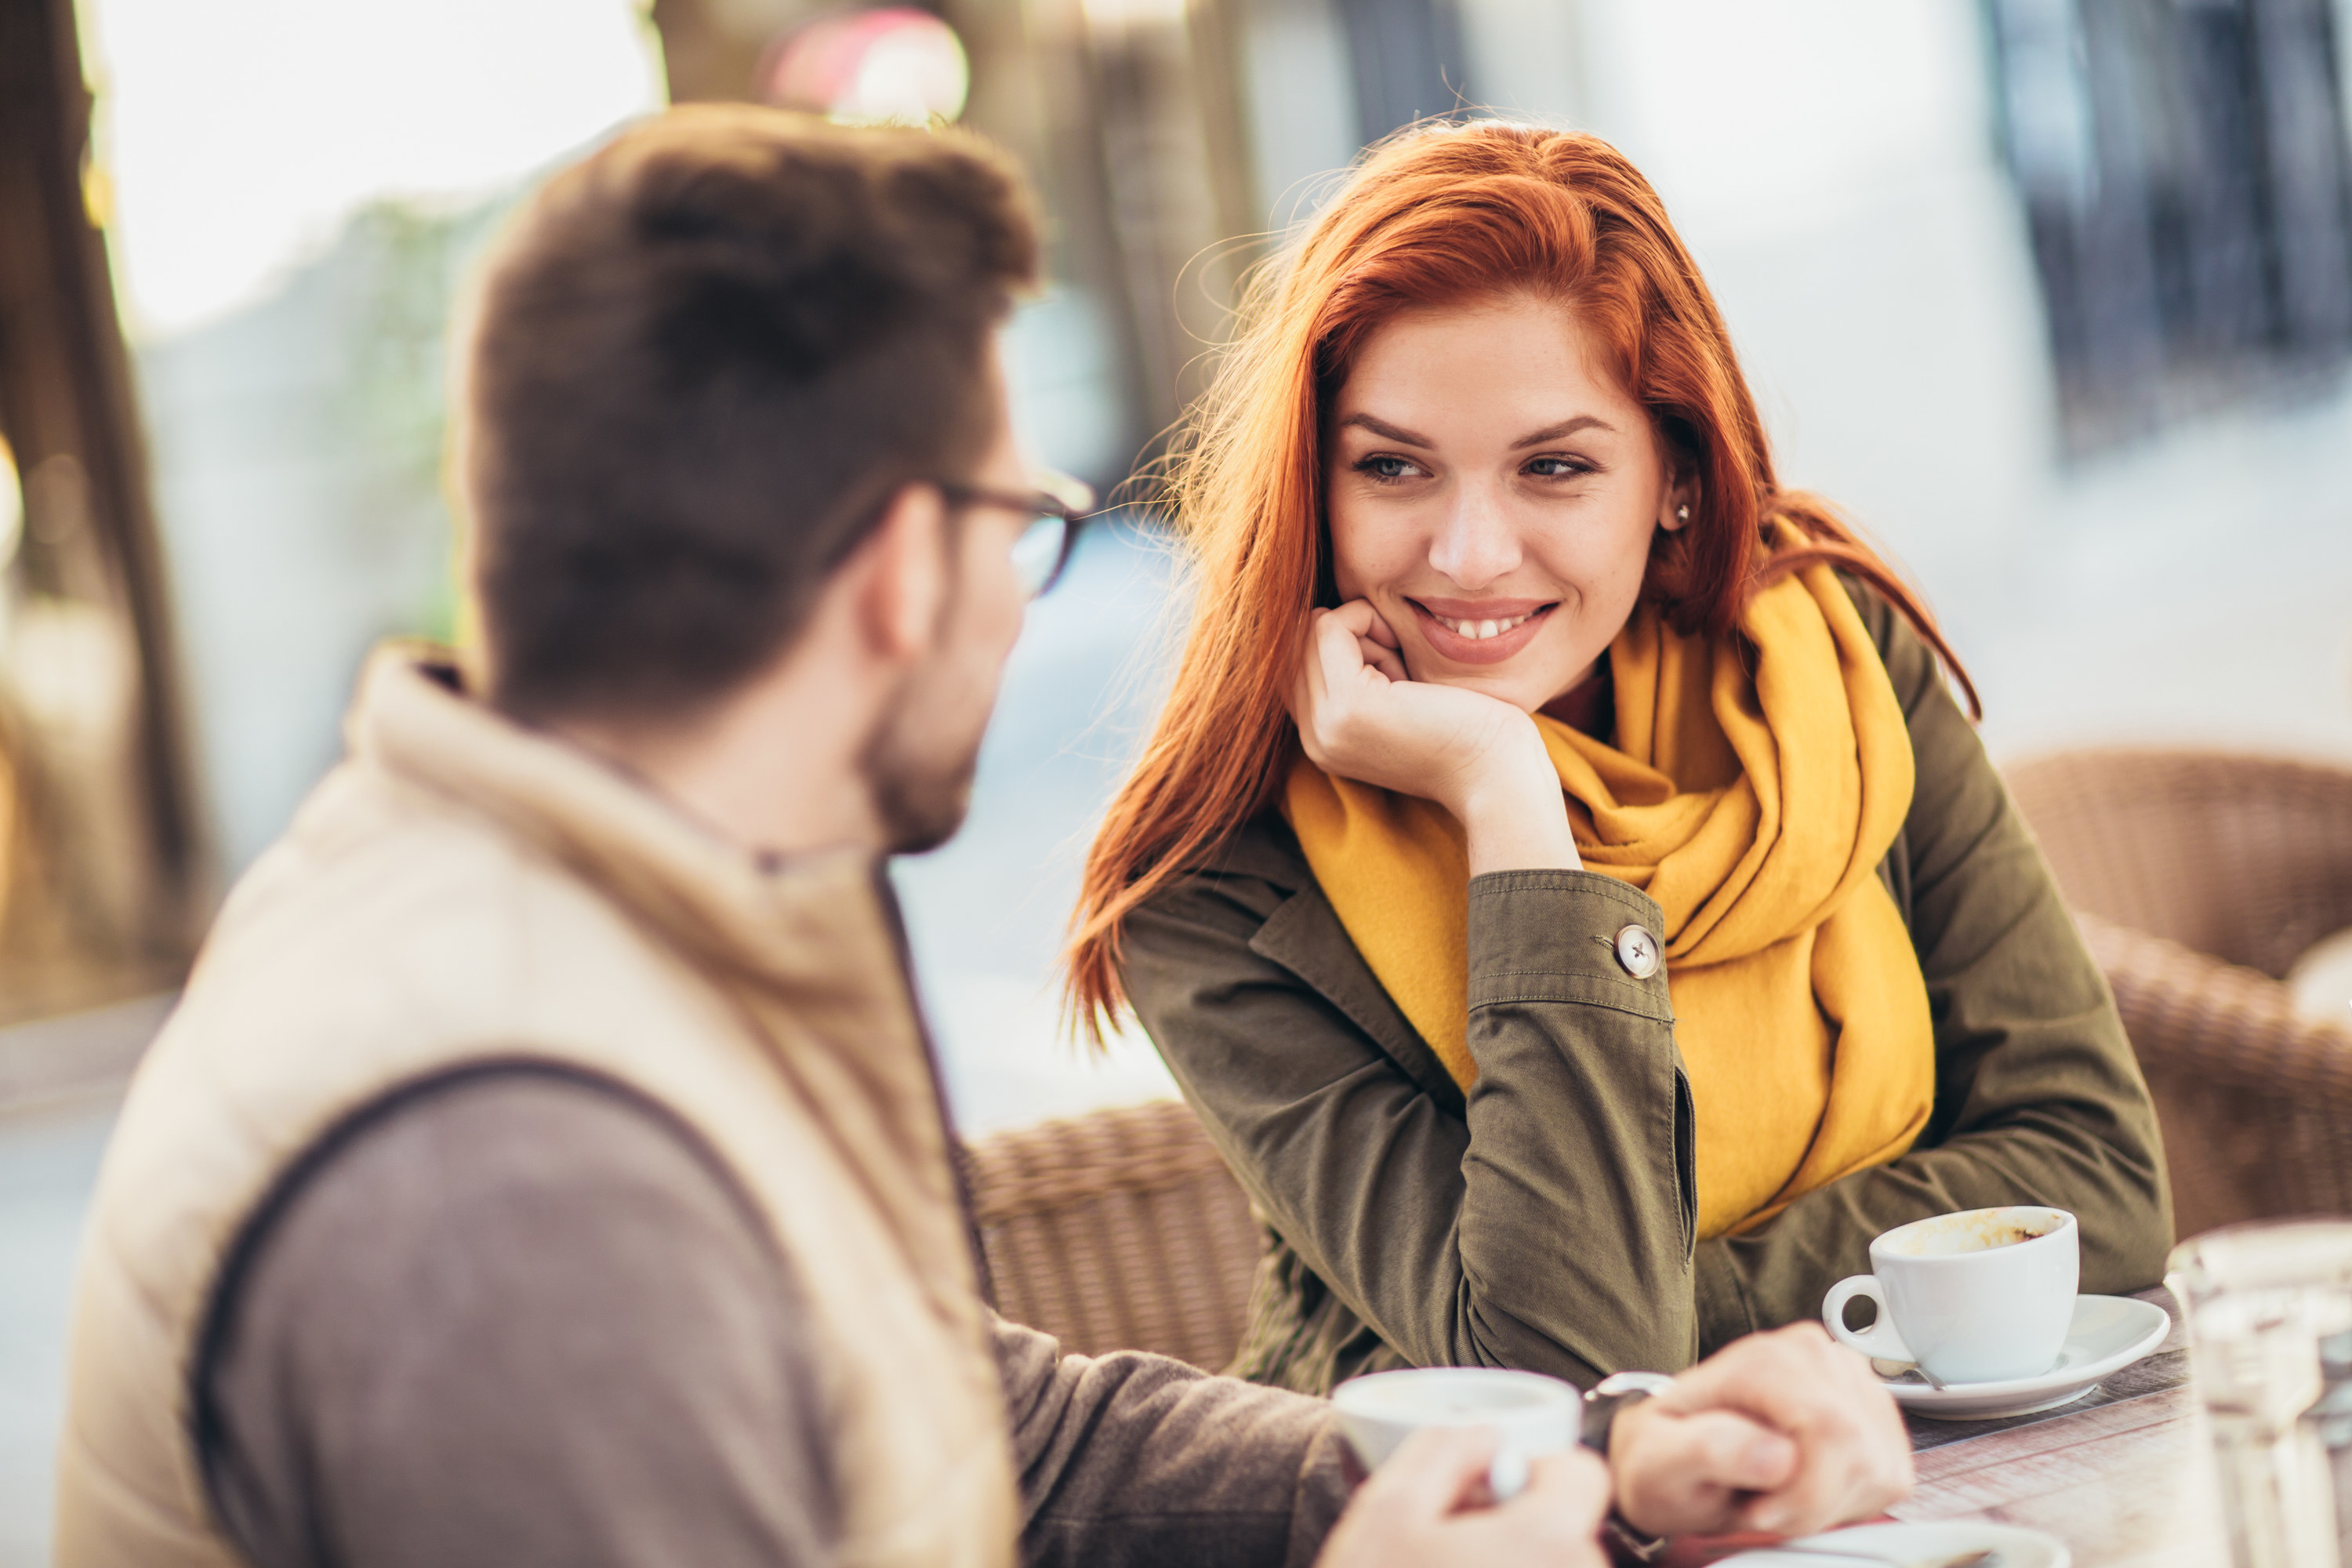 A woman smiles at a man during a coffee date